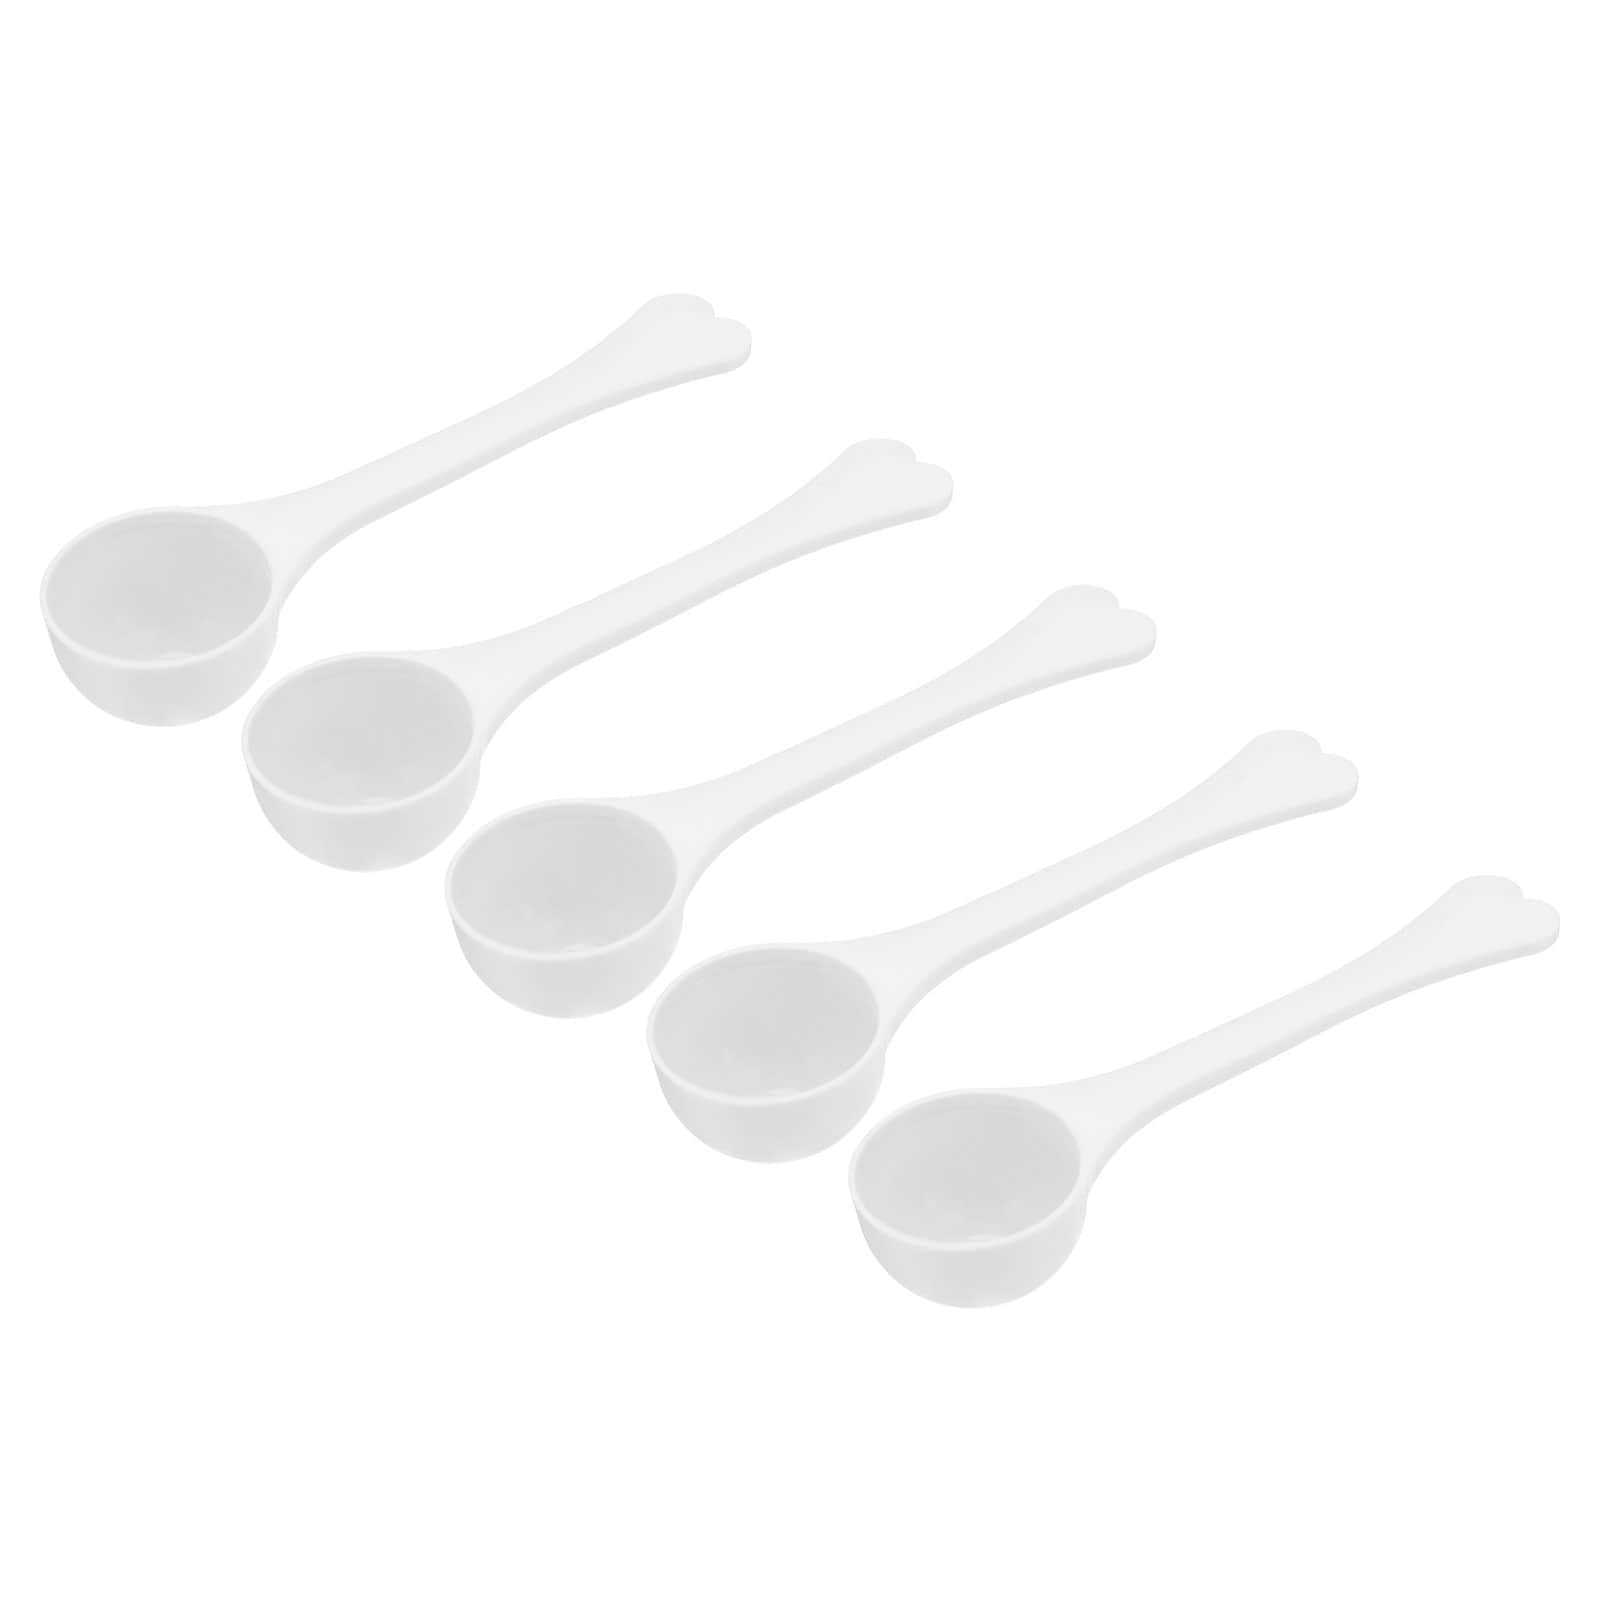 https://ak1.ostkcdn.com/images/products/is/images/direct/426cc6d262af99502488dd79413288ddd02c2b83/Micro-Spoons-3-Gram-Measuring-Scoop-Plastic-Round-Bottom-Mini-Spoon-50Pcs.jpg